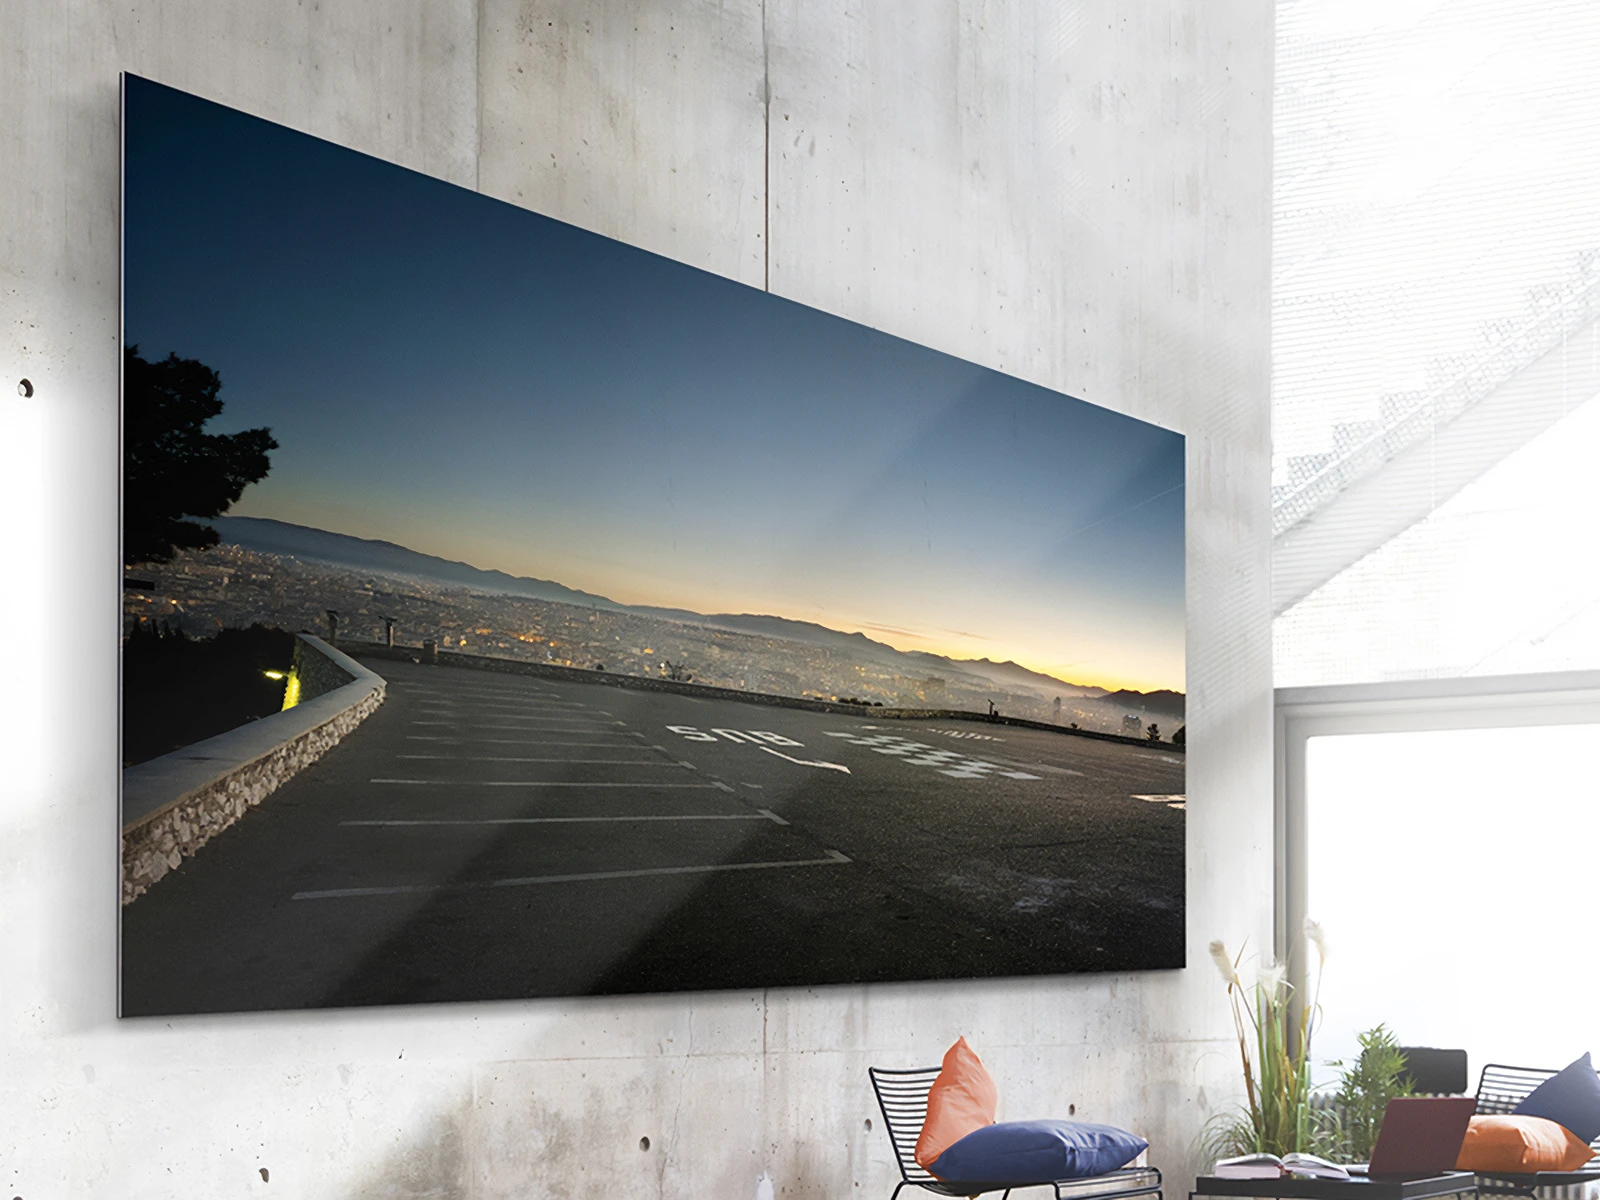 Landscape image as an WhiteWall Masterprint hanging on a wall.